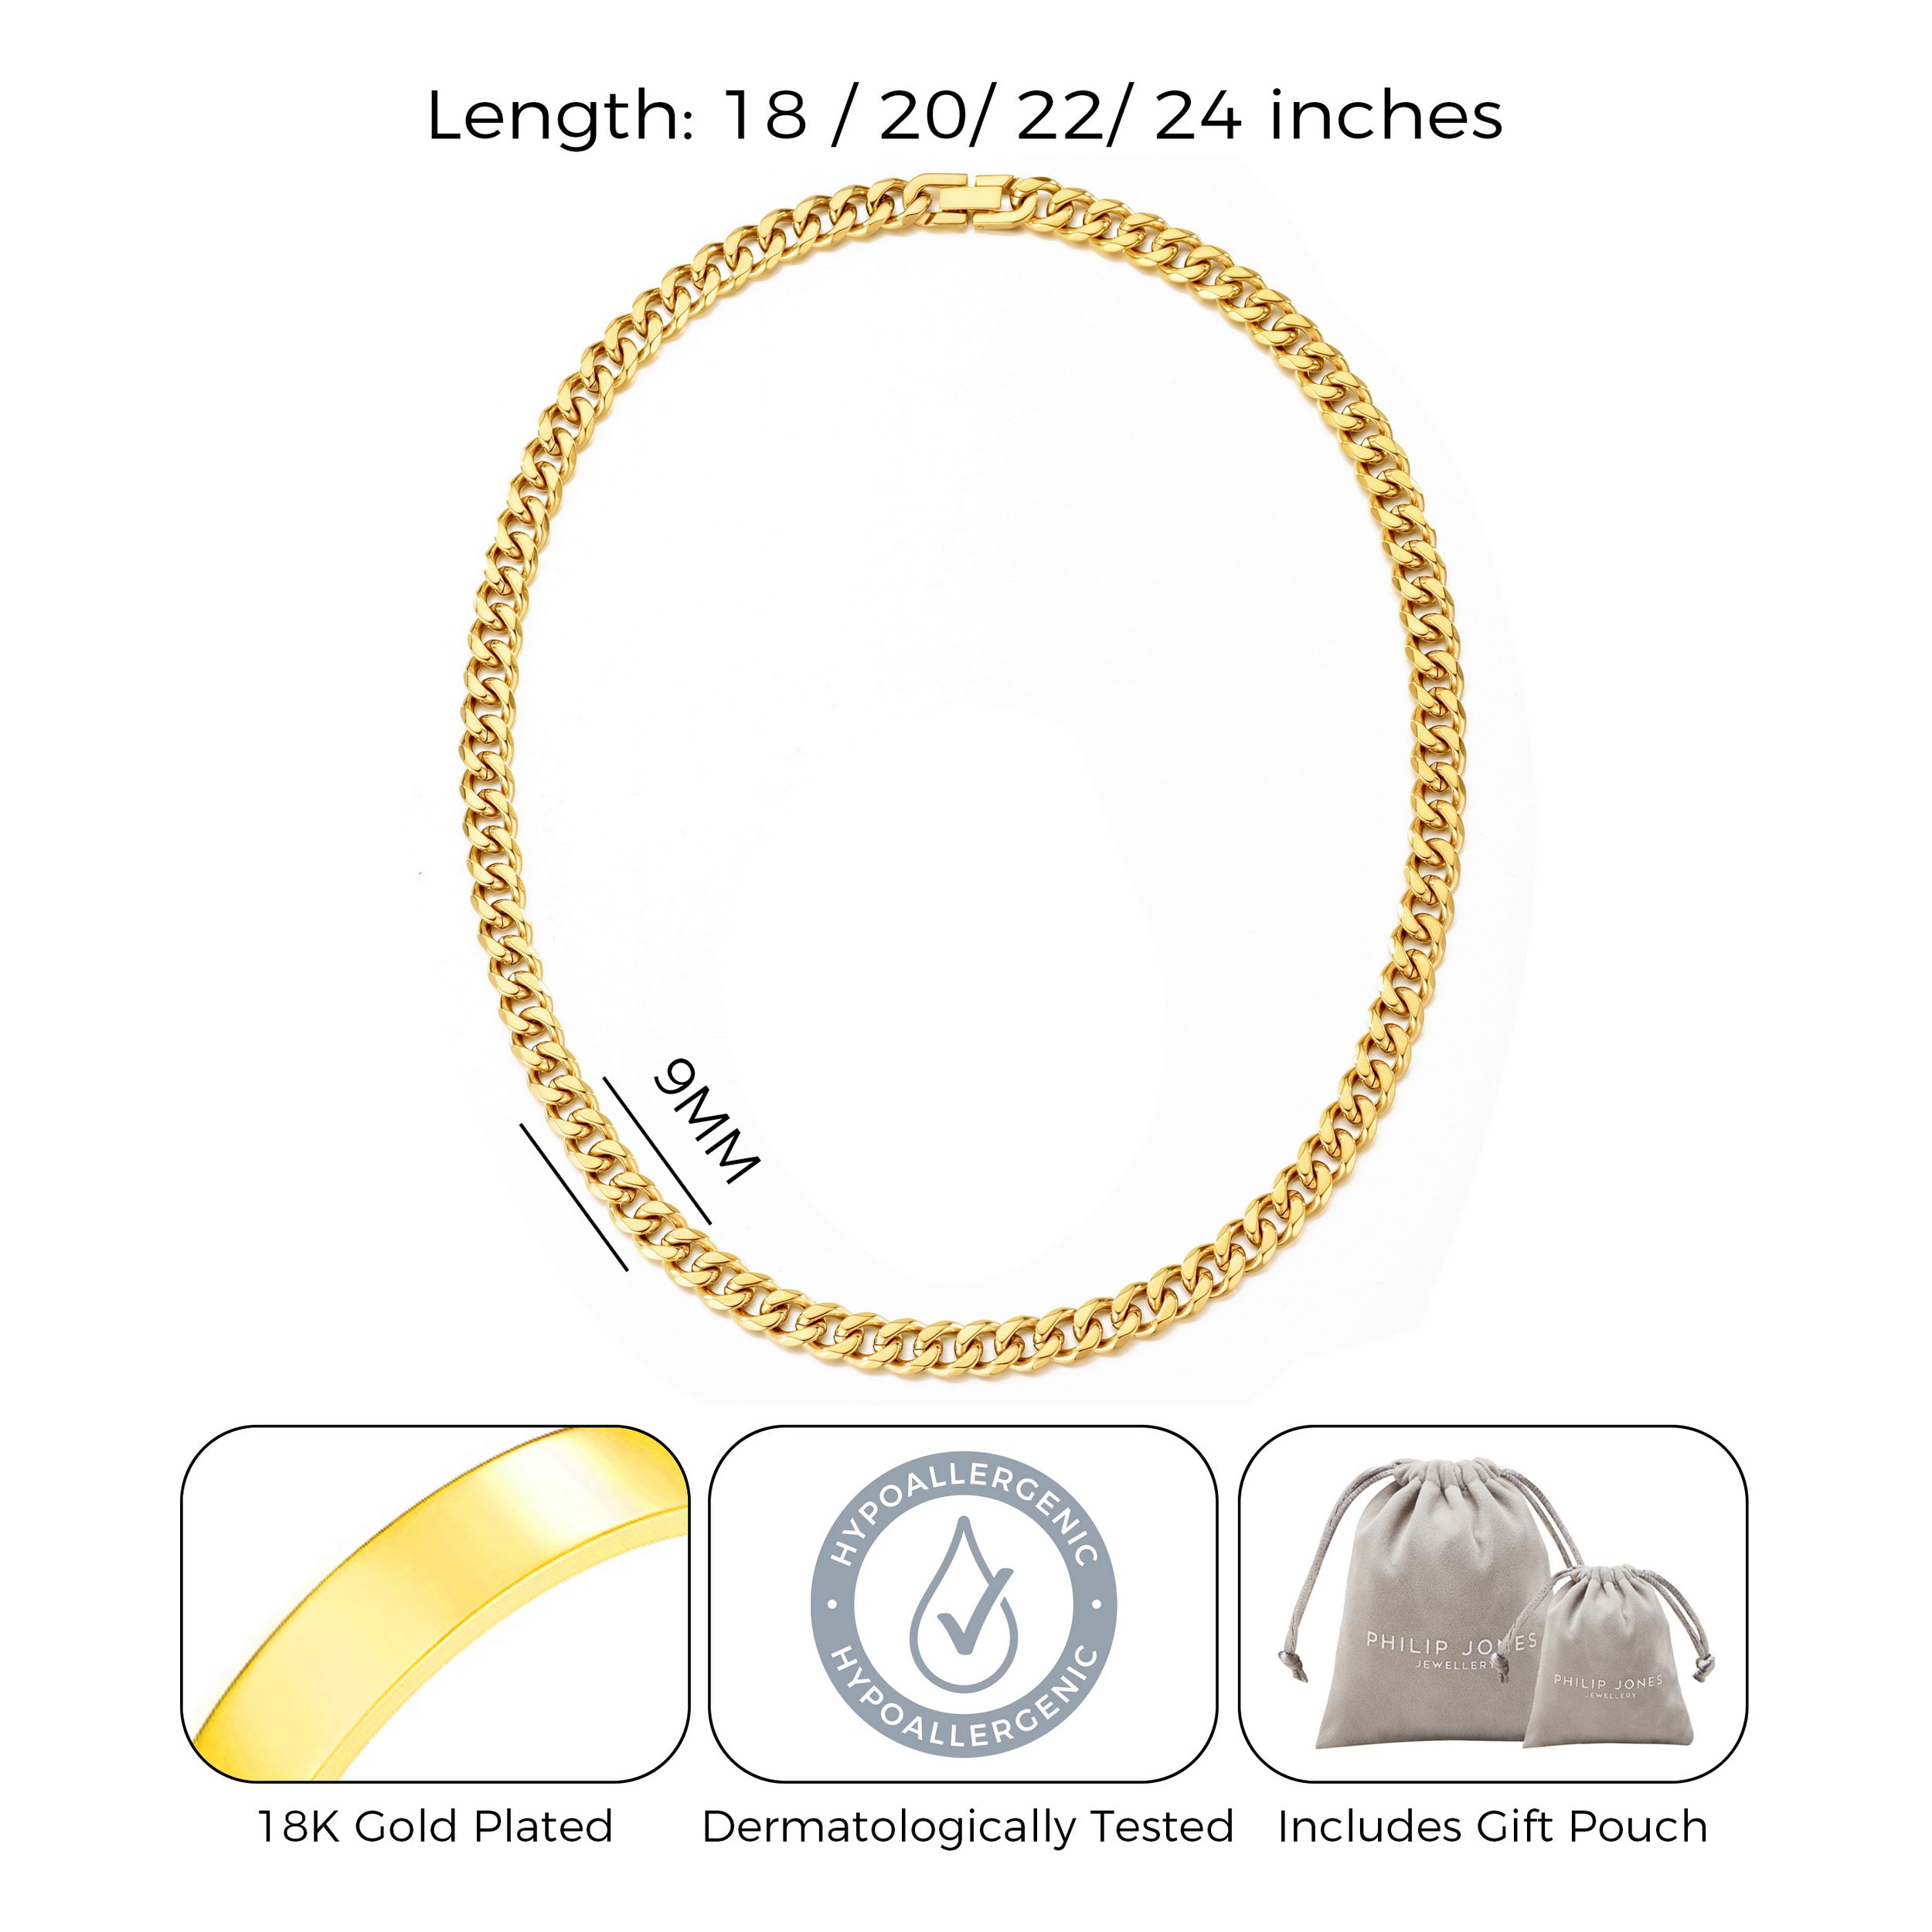 Men's 9mm Gold Plated Steel 18-24 Inch Cuban Curb Chain Necklace